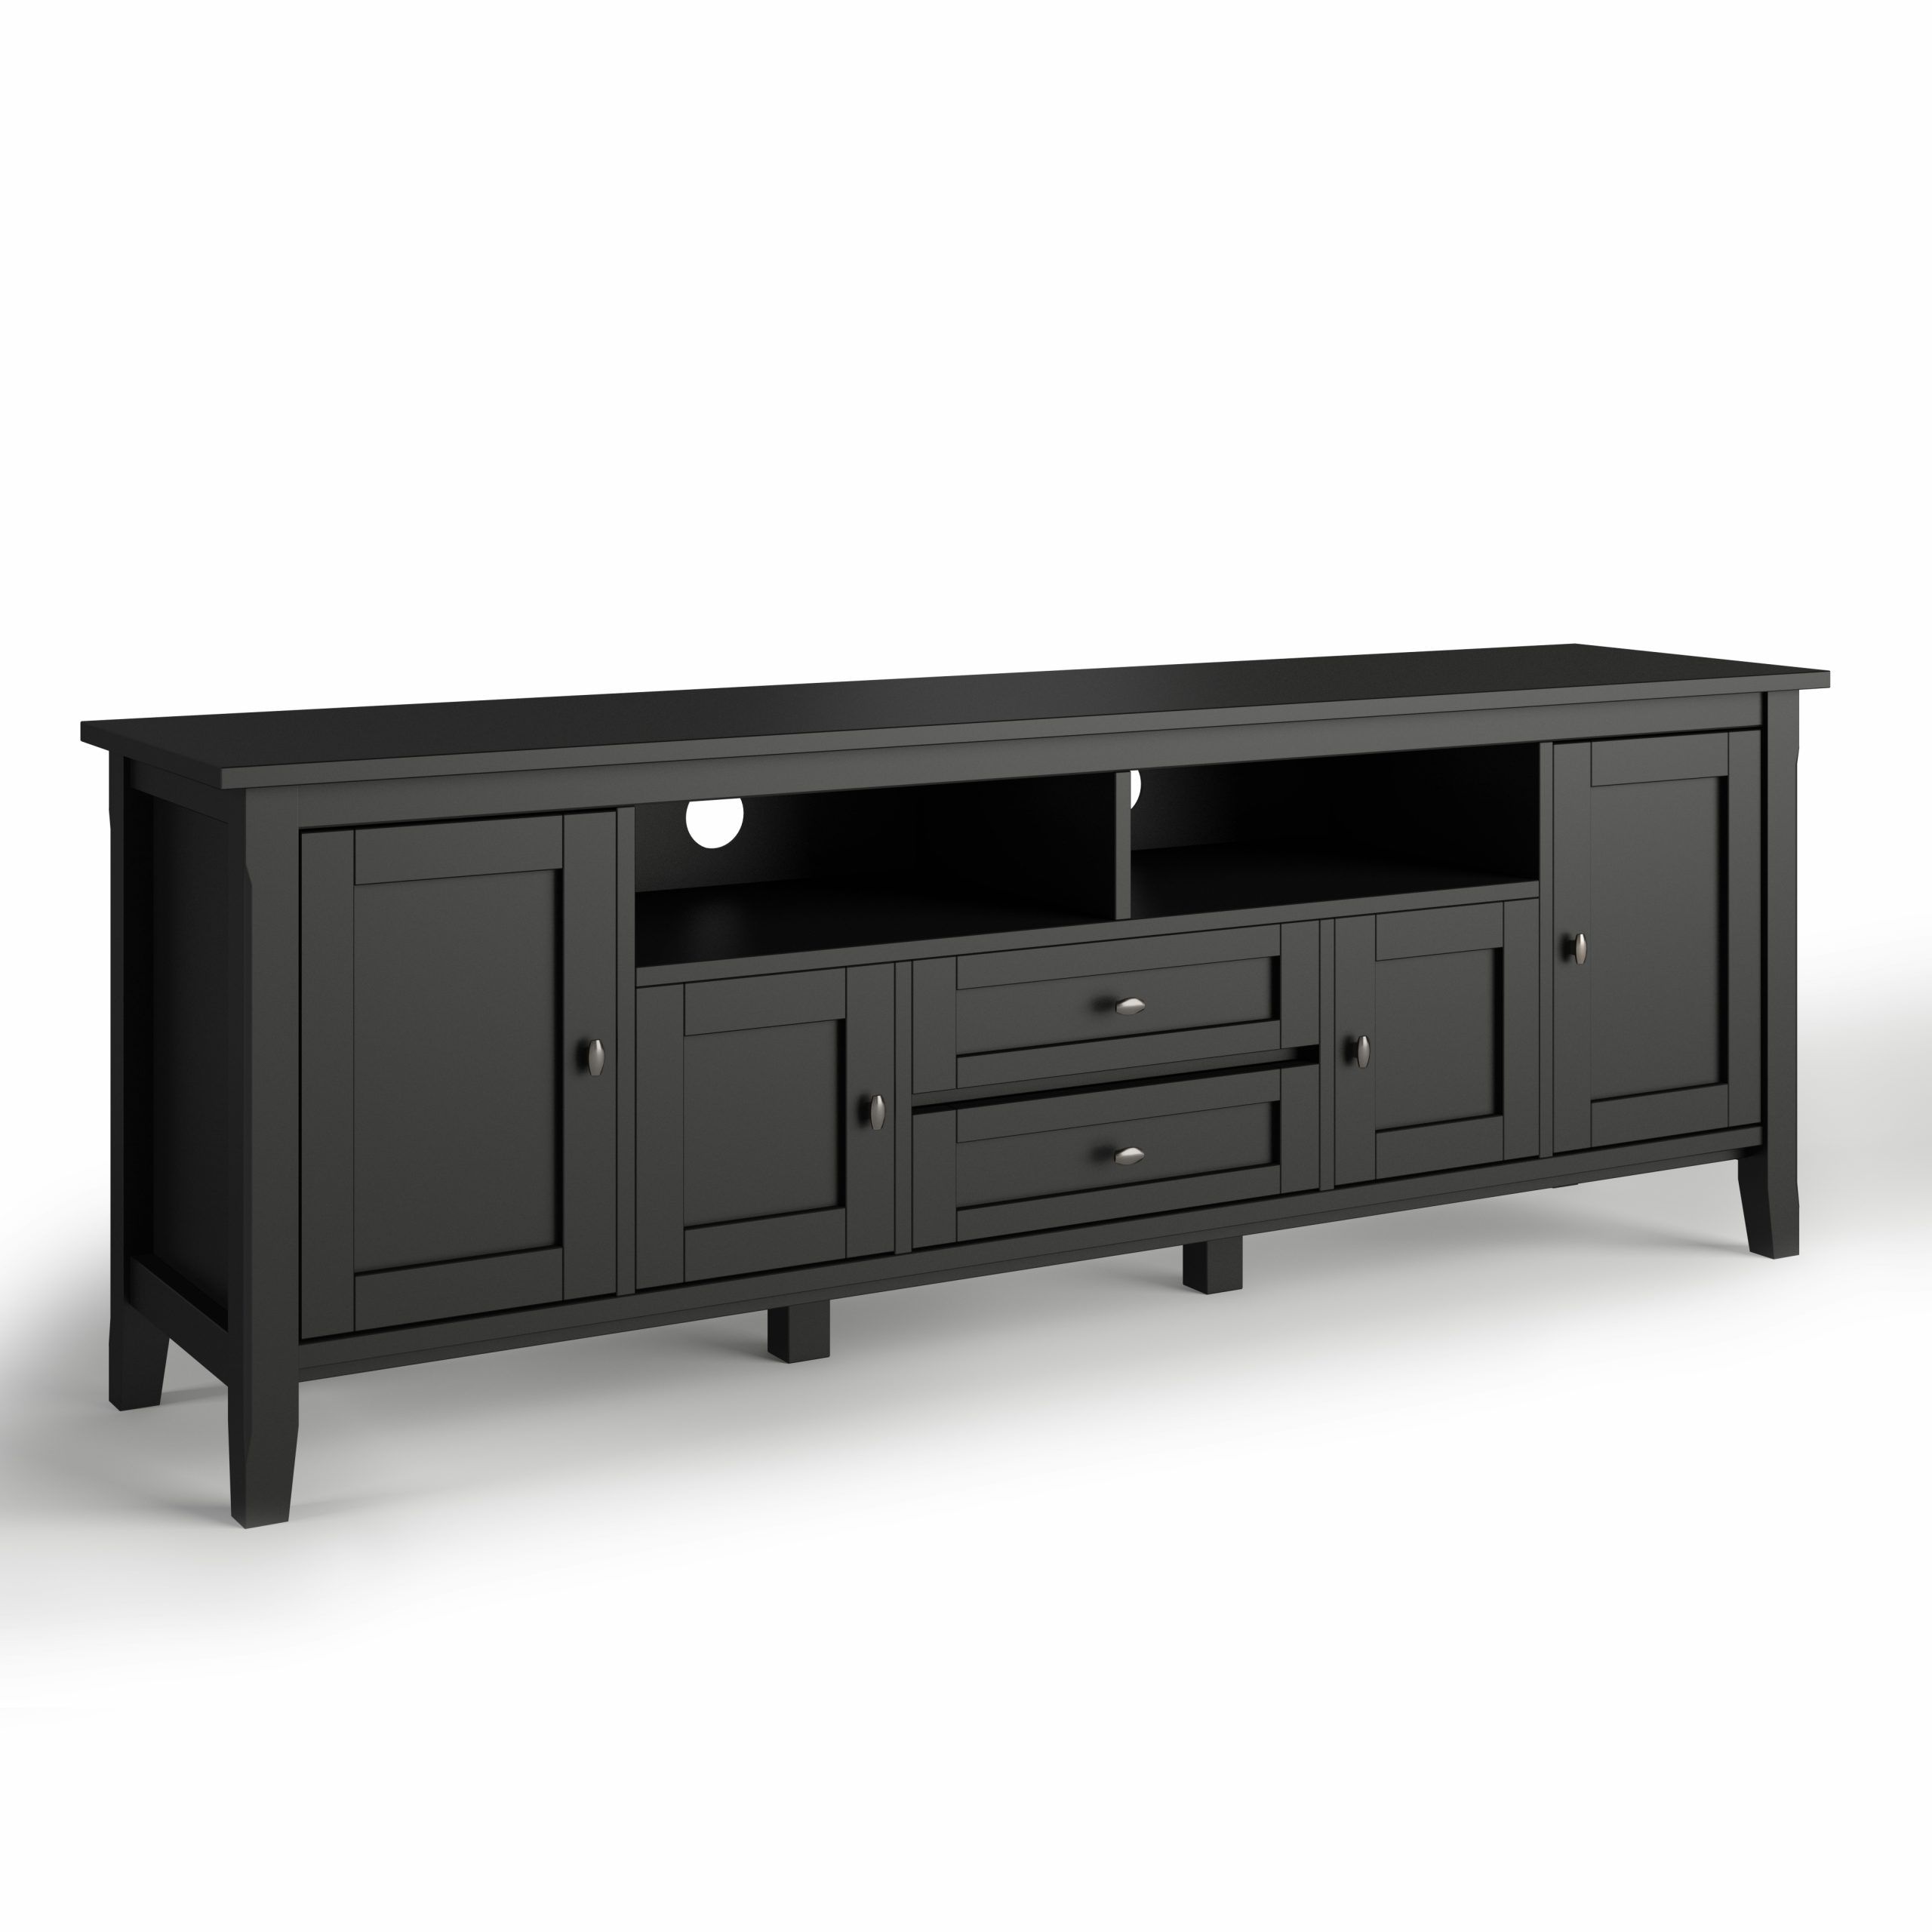 Brooklyn + Max Lexington Solid Wood 72 Inch Wide Rustic Tv Pertaining To Jackson Wide Tv Stands (View 10 of 20)